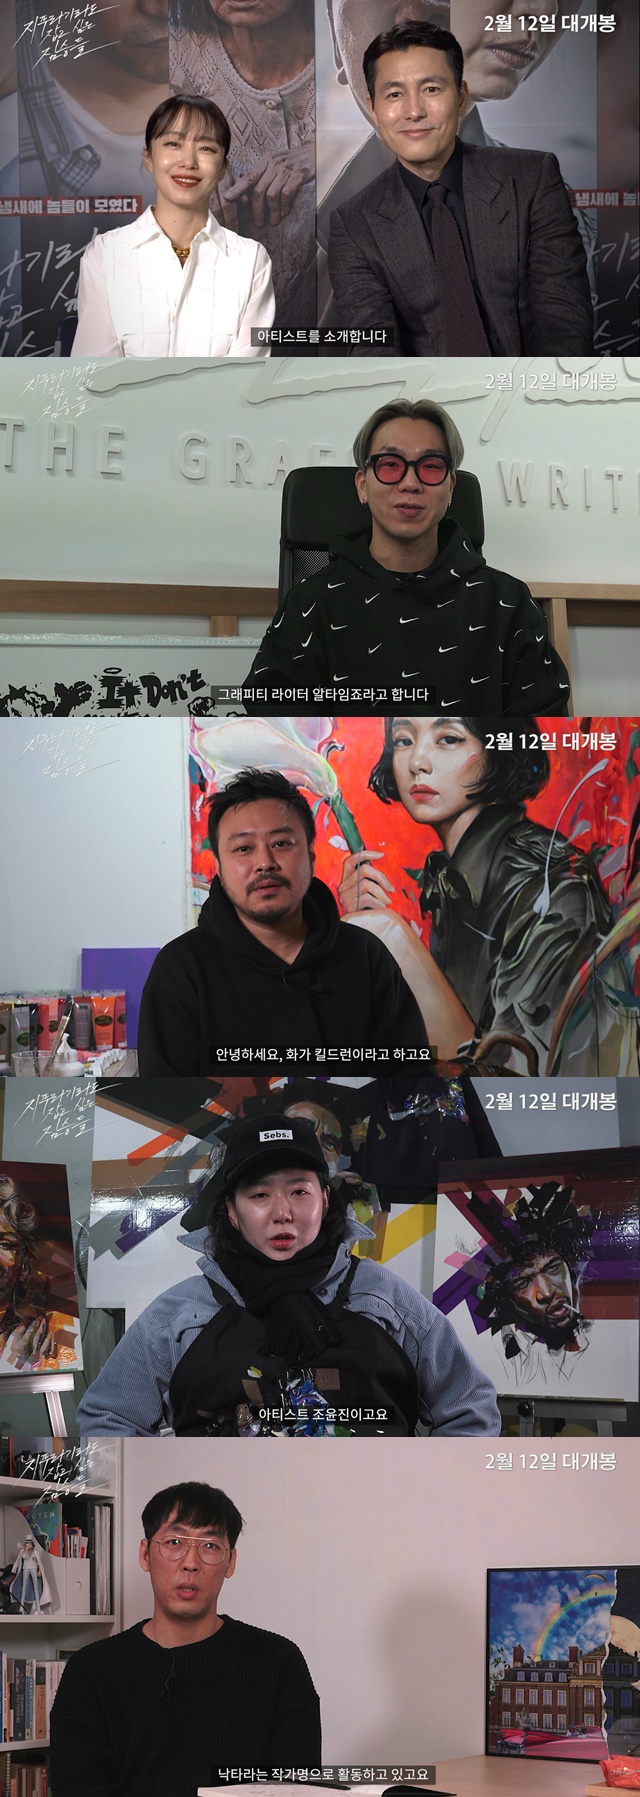 The brutes who want to catch straw is attracting attention as an inspirational movie.The movie The Beasts Who Want to Hold a Jeep (director Kim Yong-hoon), which opens on February 12, is a crime drama of ordinary humans planning the worst tang to take the last chance of their lives, the money bag.As well as meeting the top actors in Korea such as Jeon Do-yeon, Jung Woo-sung, and Bae Seong-woo, as well as a special movie gallery where The Animals Who Want to Hold the Jeep which captivated the audience with intense visuals and unique images every time the appearance was released a little before the release,This collaboration was designed to bring fresh and colorful pleasure to the audience in the exchange between the artists in various fields by re-creating the inspiration that was received after watching the movie one step further from watching the movie as a new art work.Jung Woo-sung of Taeyoung Station said, It is a valuable opportunity to meet the works of The Artists who have worked on the inspiration of the movie.The artists who participated in this exhibition are young Korean artists who are building a unique area in their respective fields. Graffiti The Artist Altime Joe, an internationally famous Graffiti crew Stick Up Kids, The Artist Killedrun, which shows delicate and realistic paintings, and Tape The Artist Cho Yoon-jin, The Artist camel, a graphic of Raju, participated.The artist Altime Joe said, I tried to express wittyly while working on the part where the central material, the money bag, is tied like a link with the characters. He said he focused on the intense psychological changes and relationships between the characters in front of the money bag.The artist Killedron expressed his feelings about the work, saying, I focused on stimulating the image and energy in the movie to be imagined in the picture. The artist Cho Yoon-jin said, The expectation point of the movie is destiny and reversal.pear hyo-ju